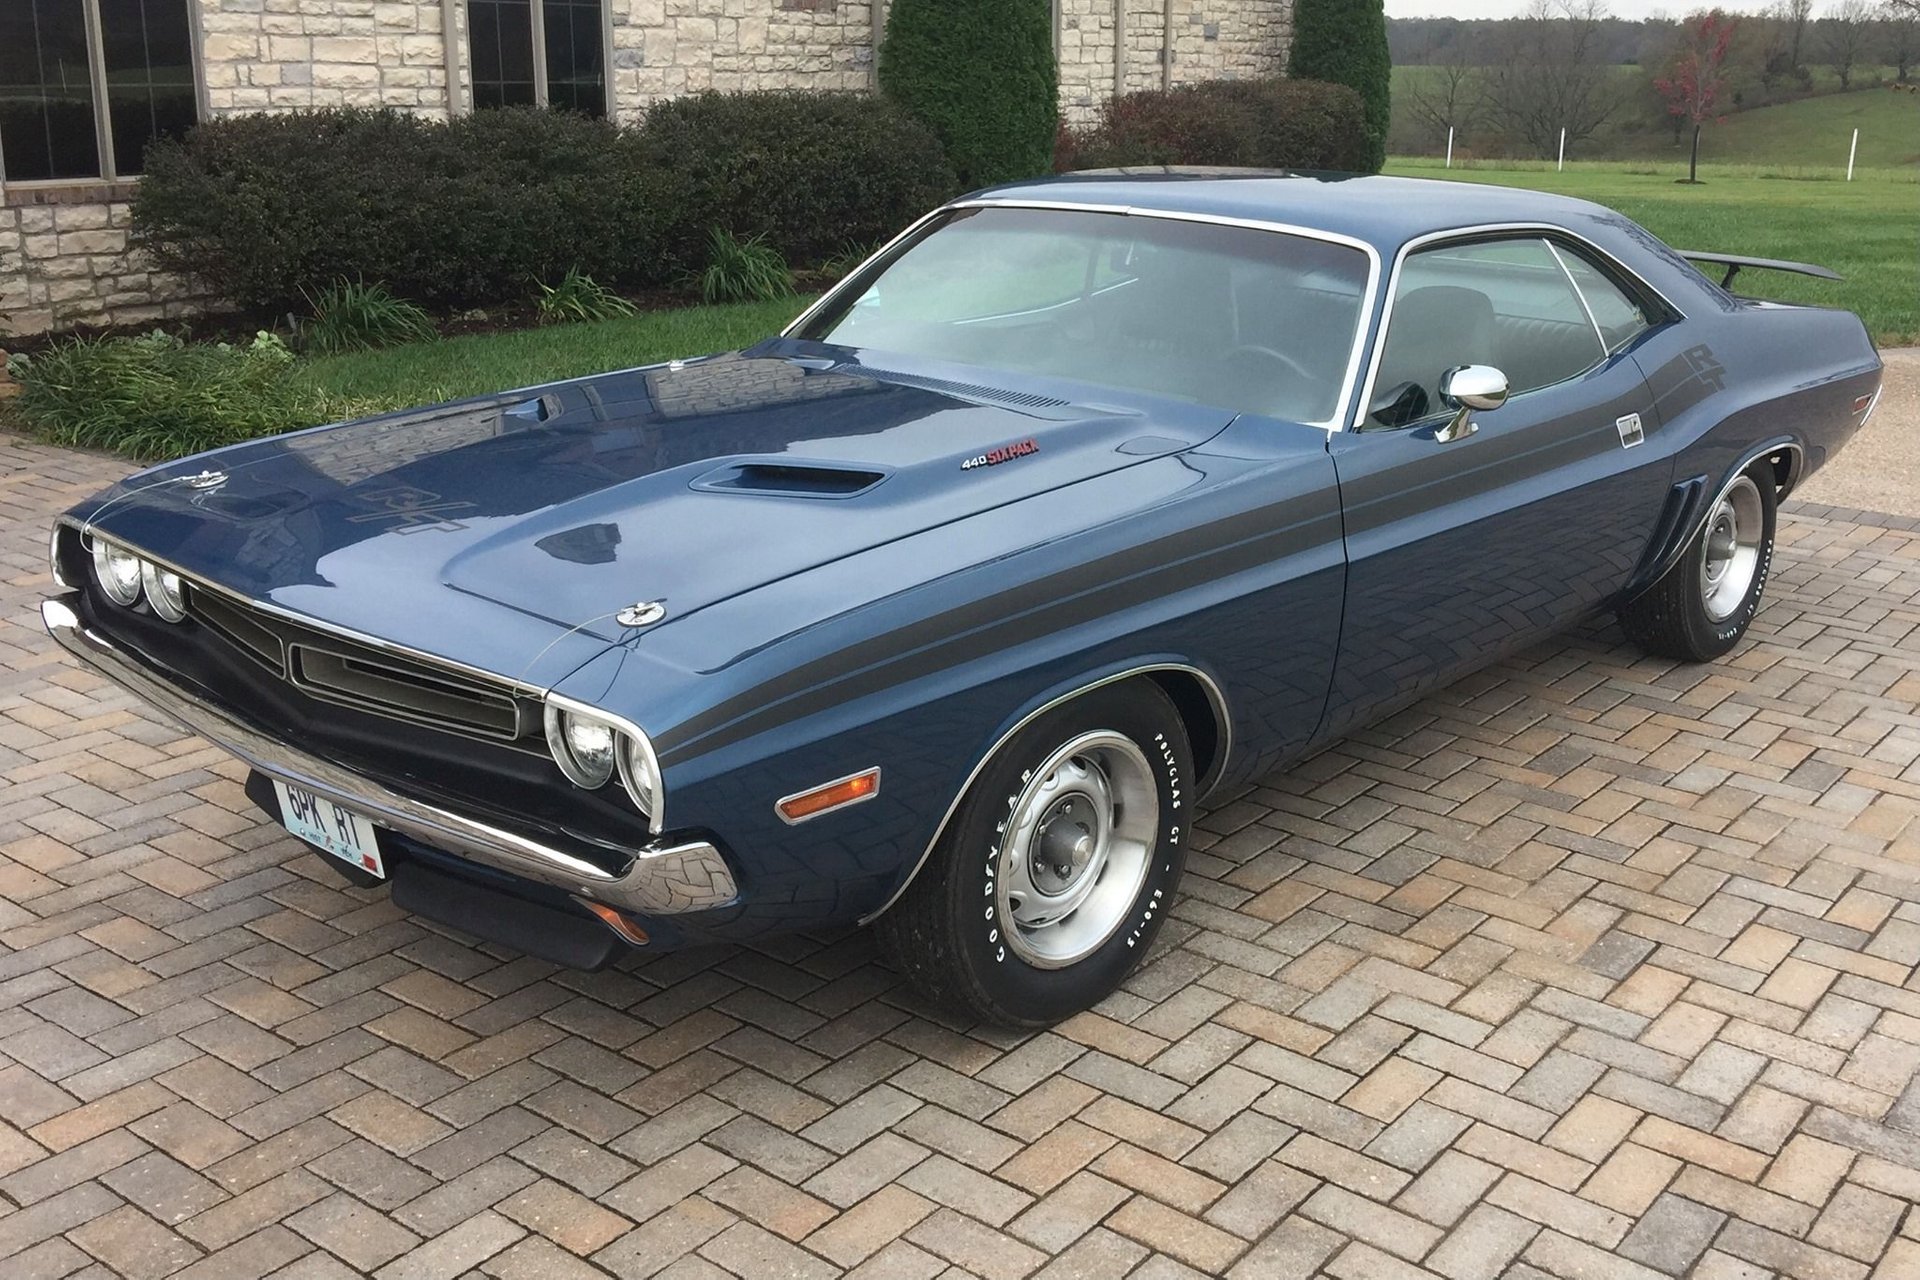 1971 Dodge Challenger Rt 440 Six Pack Rev Muscle Cars